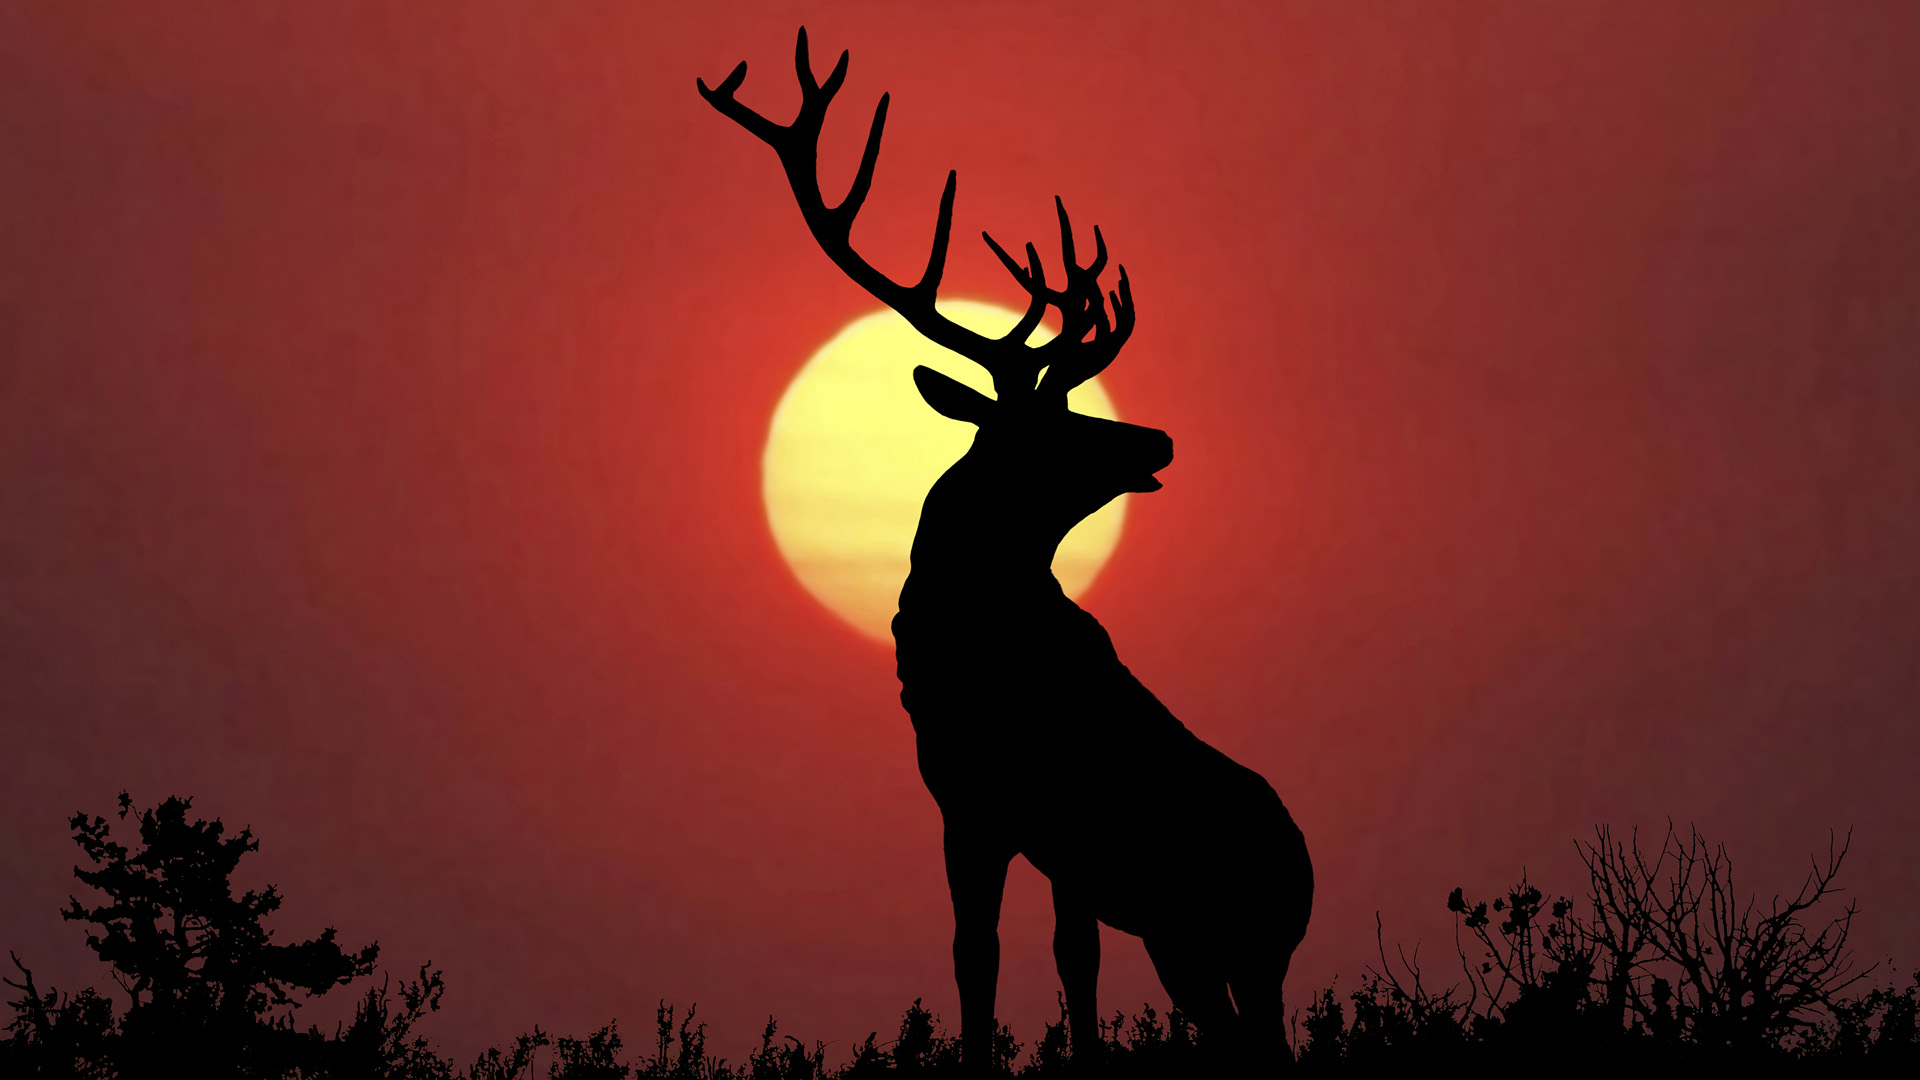 Deer wallpapers for desktop, download free Deer pictures and backgrounds  for PC 